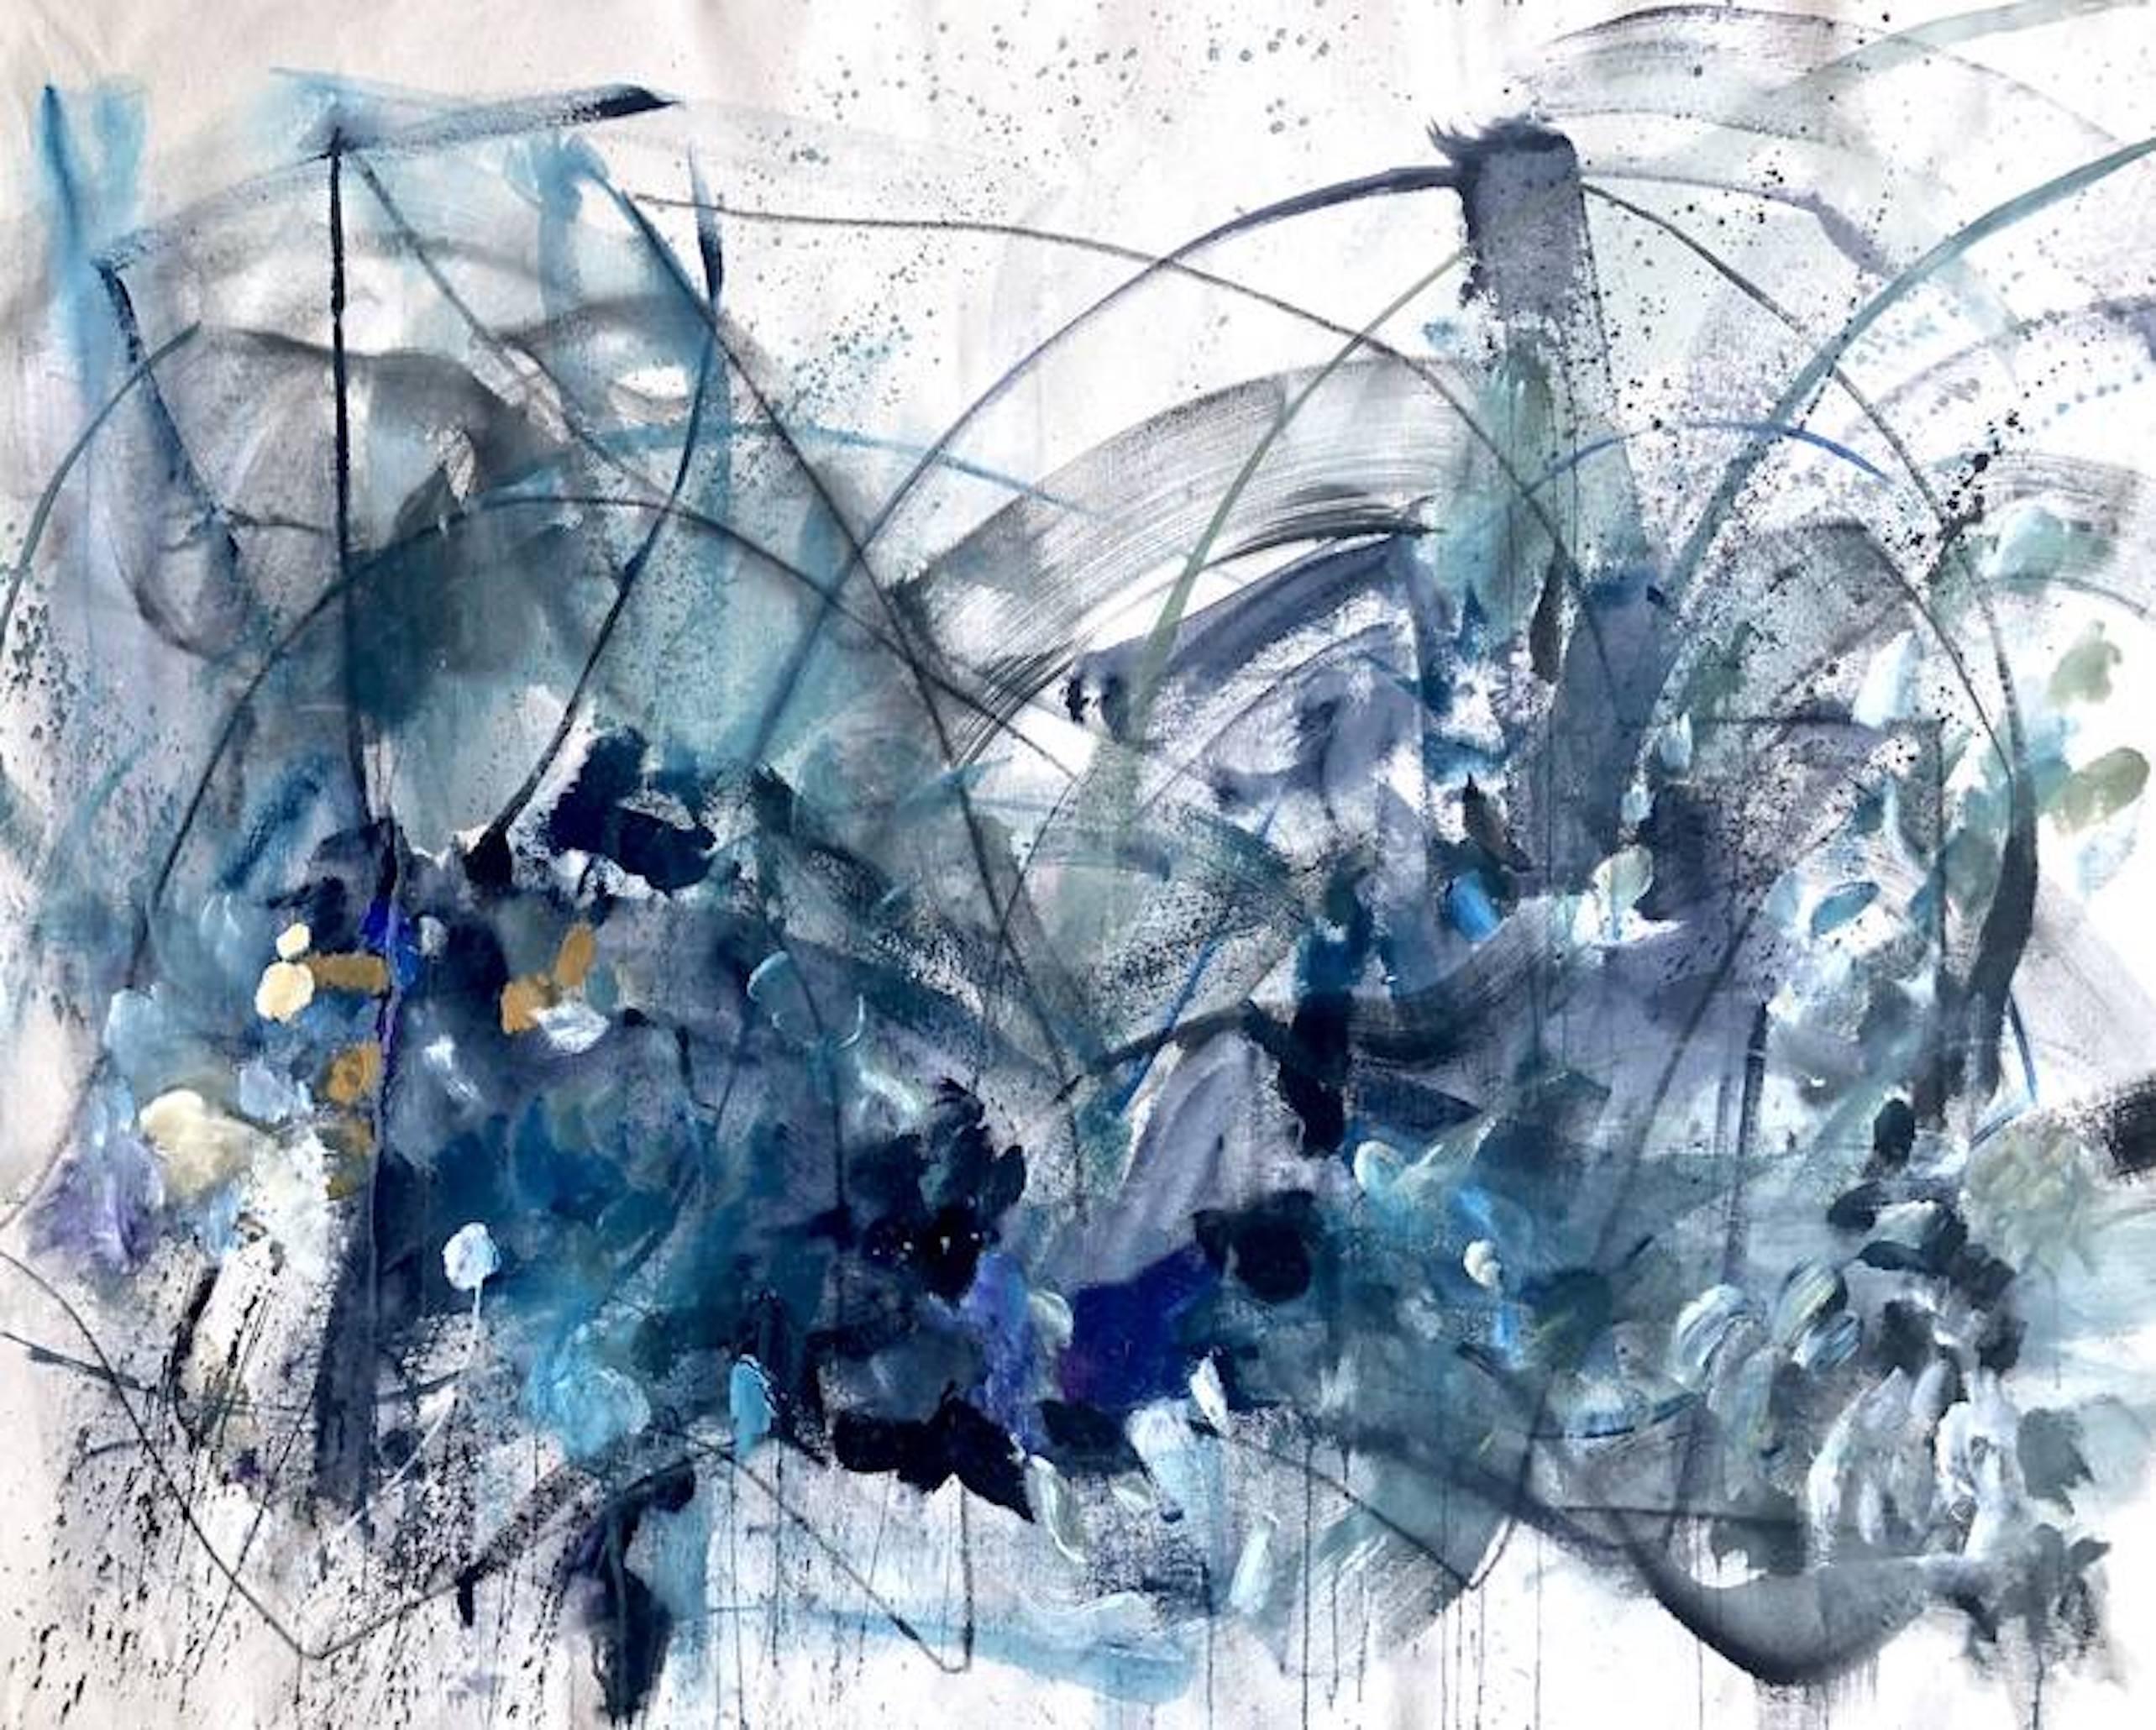 Vicky Barranguet Abstract Painting - Stella by stralight